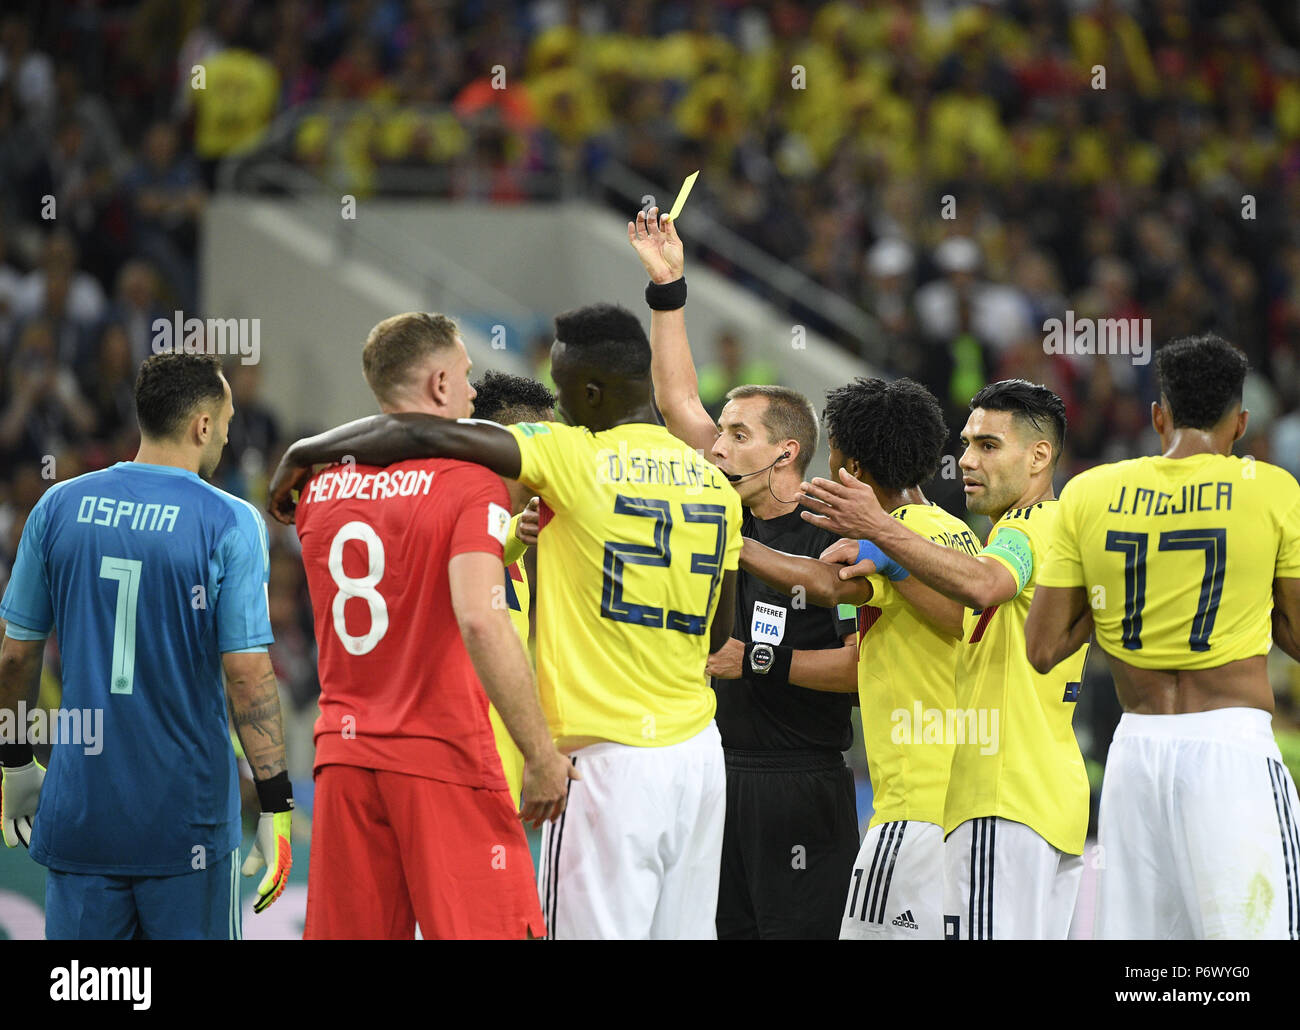 Moscow, Russia. 3rd July, 2018. The referee gives a yellow card to Wilmar Barrios of Colombia during the 2018 FIFA World Cup round of 16 match between England and Colombia in Moscow, Russia, July 3, 2018. Credit: Lui Siu Wai/Xinhua/Alamy Live News Stock Photo